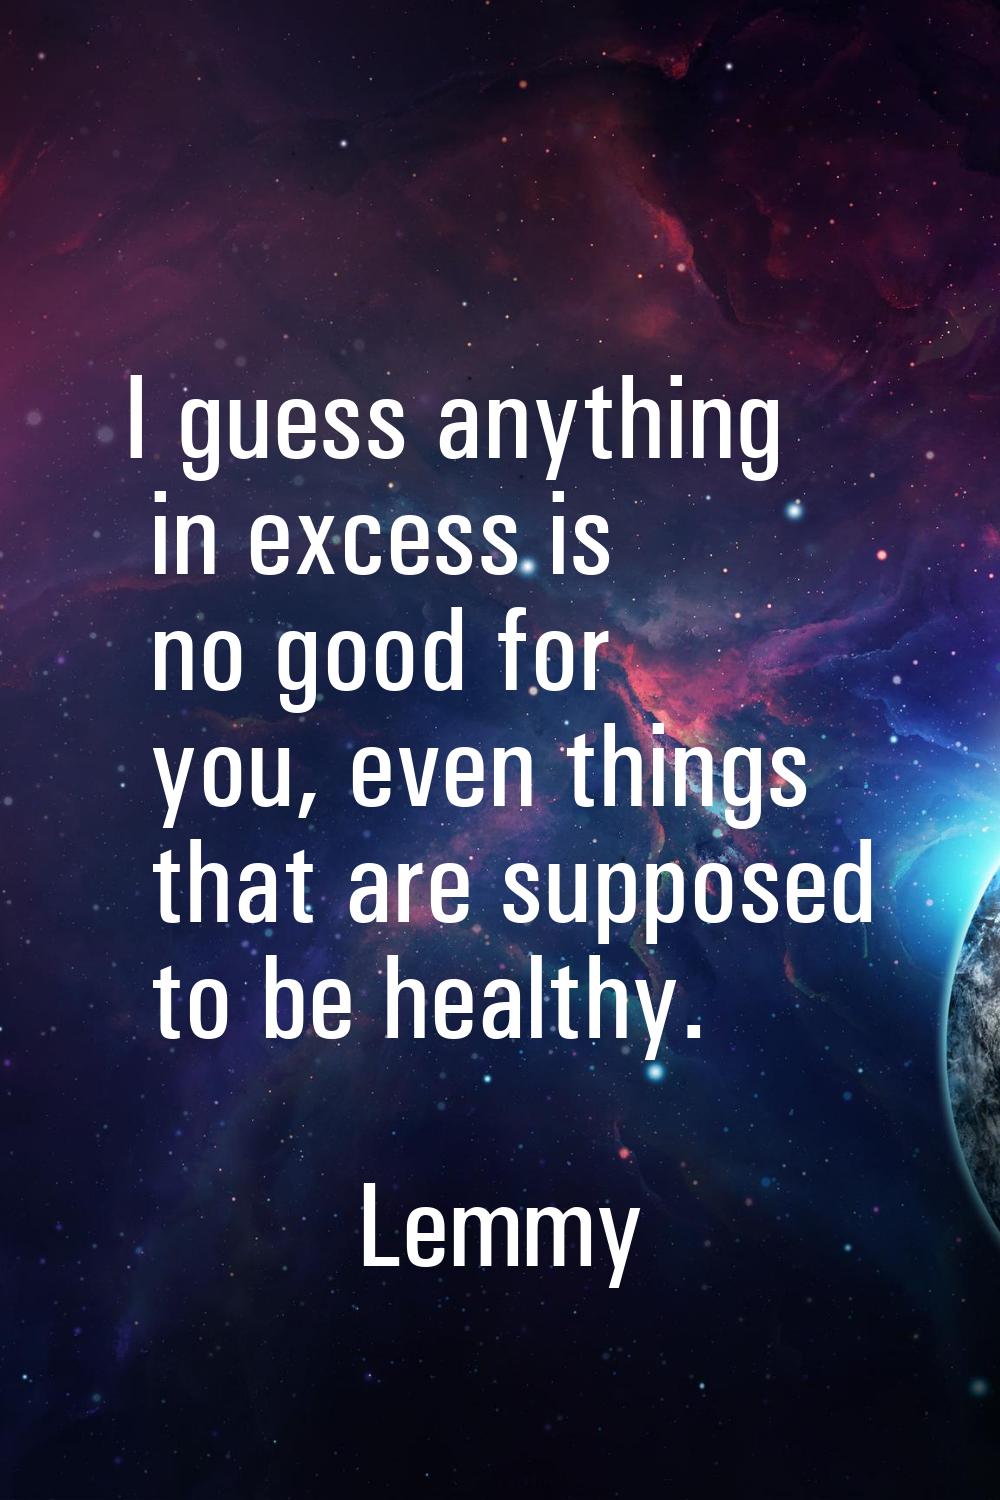 I guess anything in excess is no good for you, even things that are supposed to be healthy.